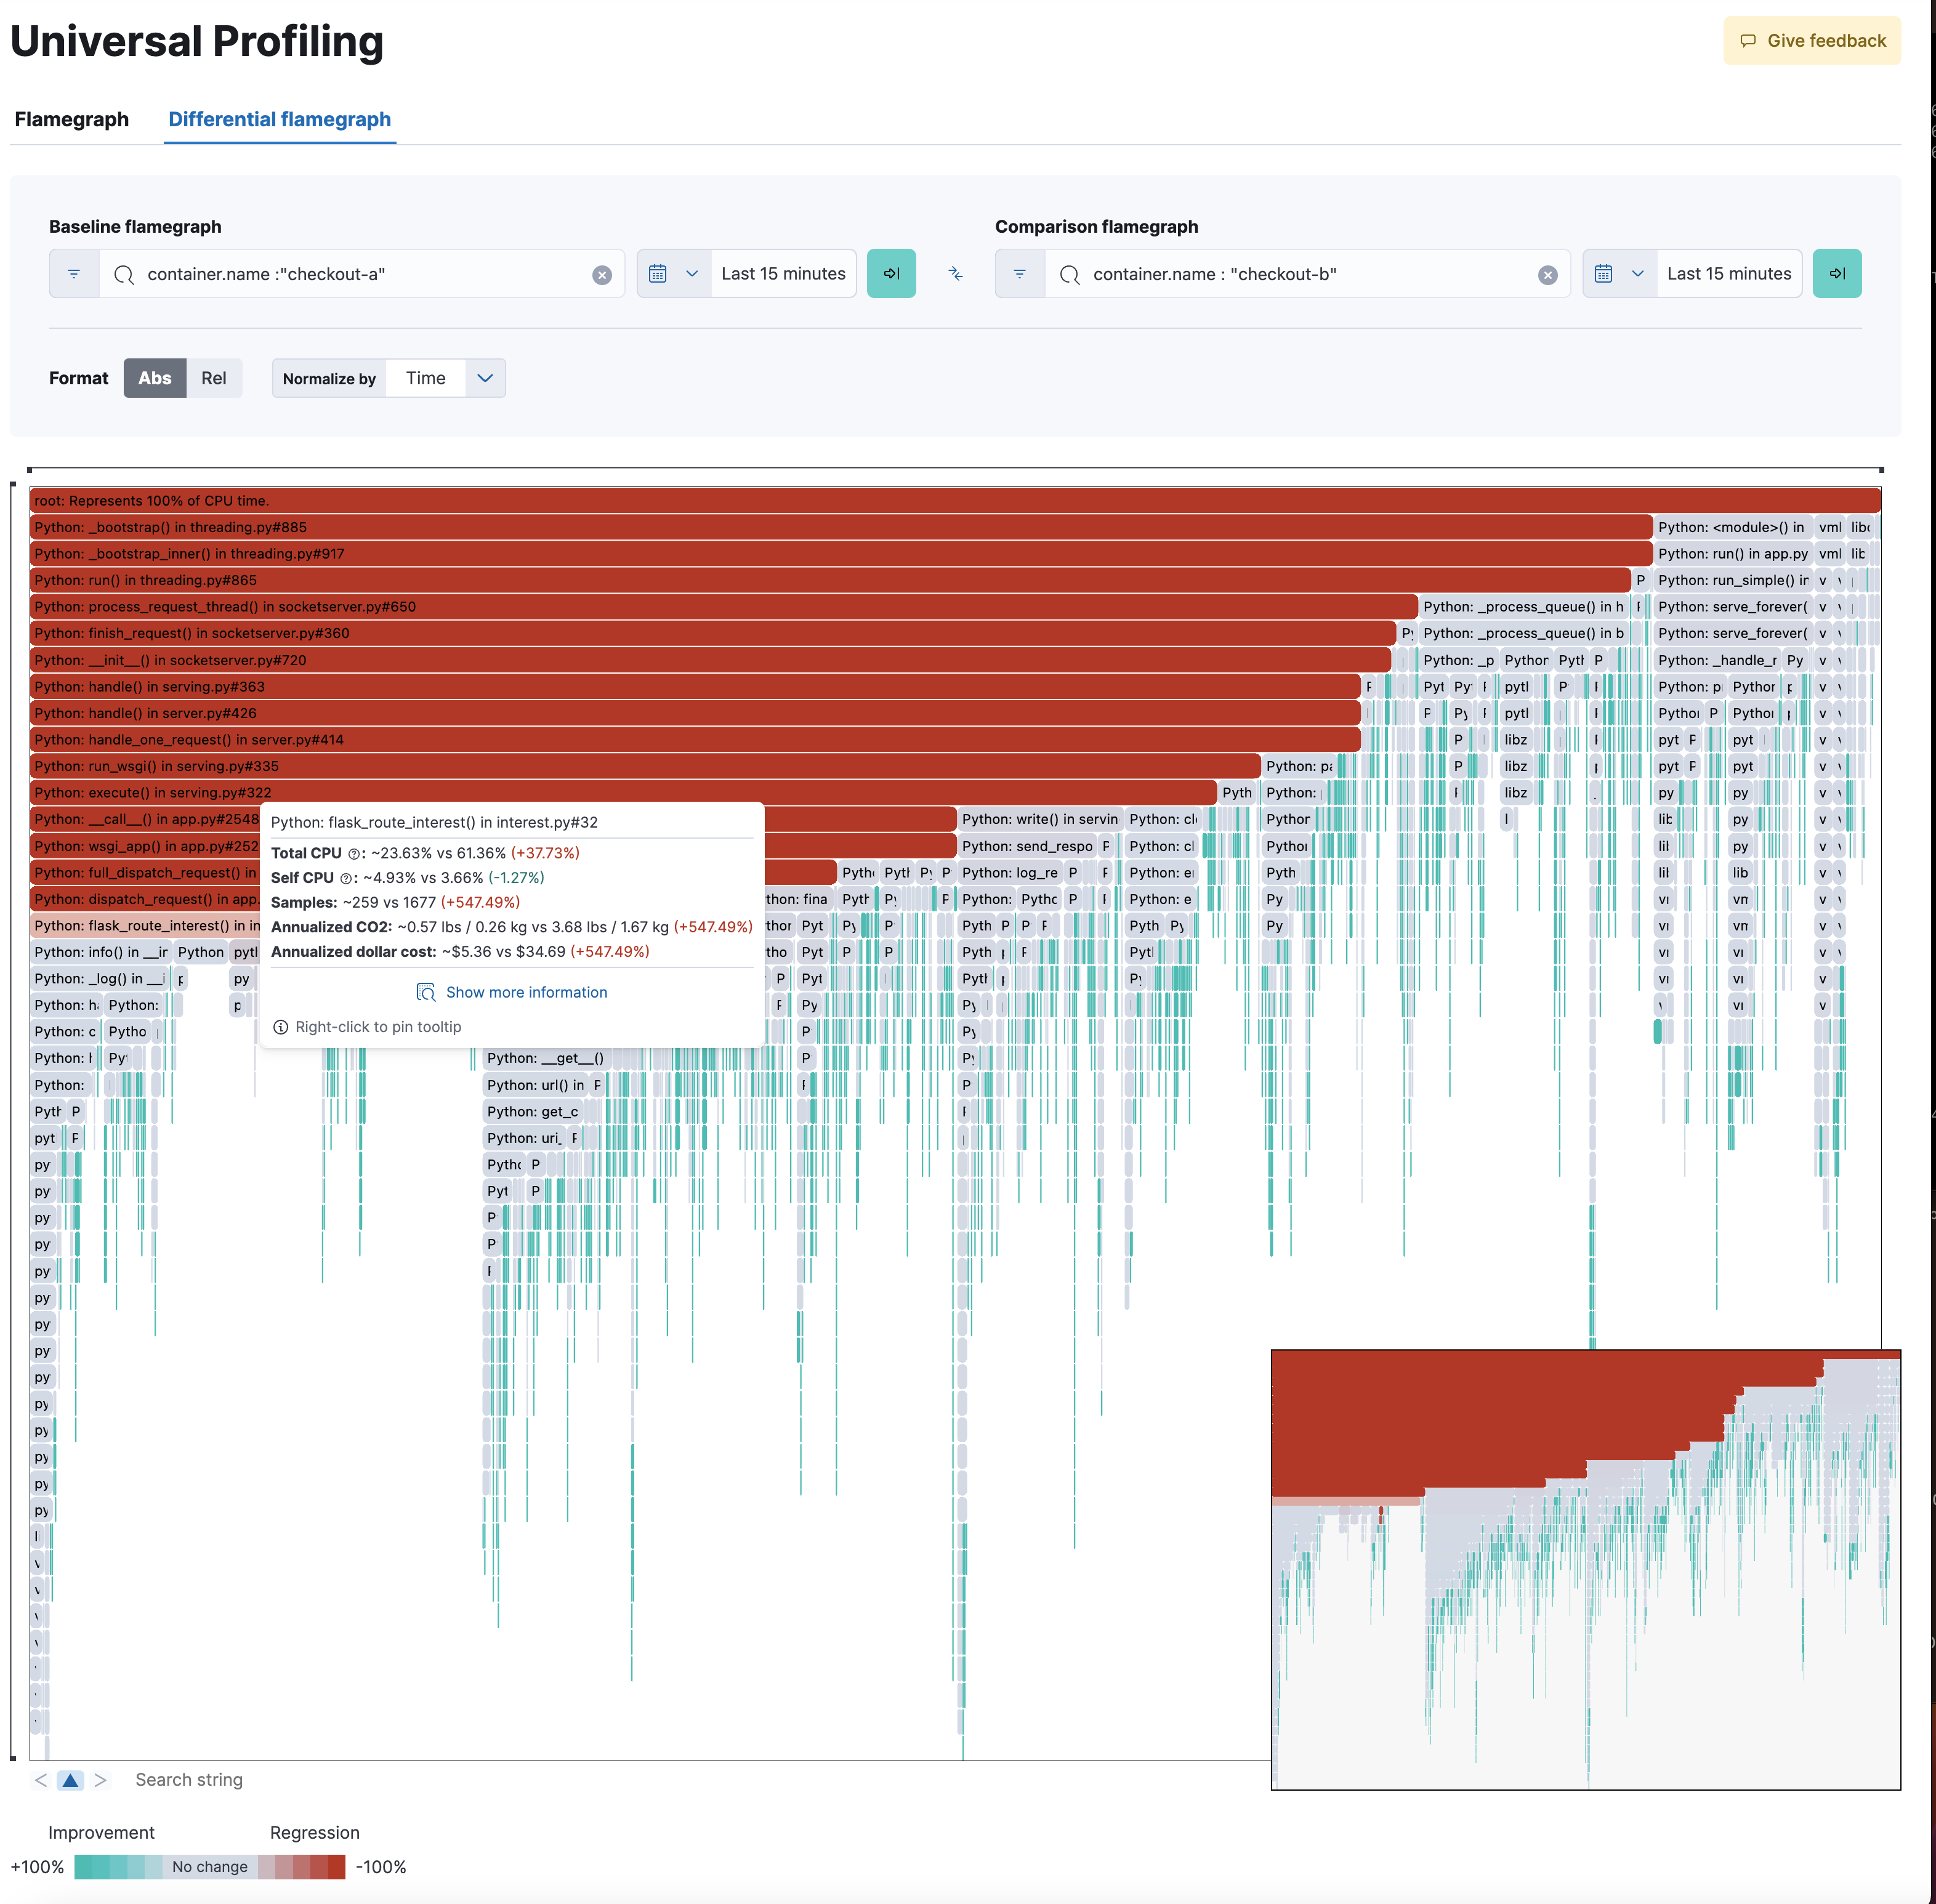 profiling flamegraph differential view